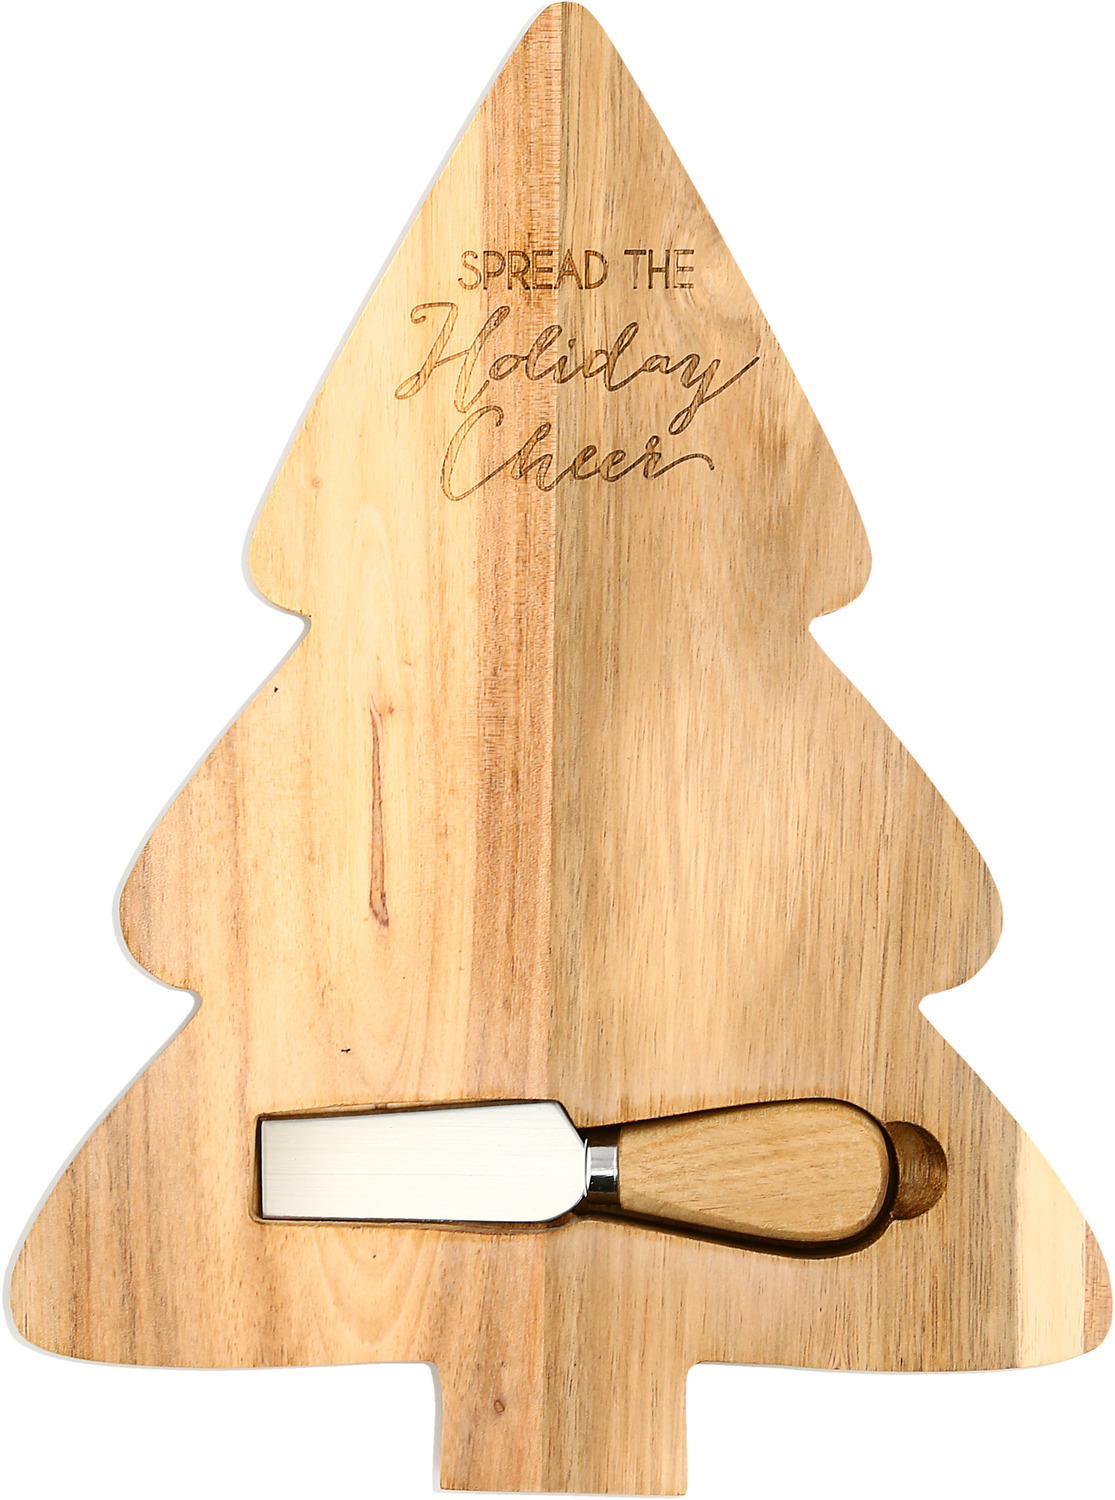 Spread Cheer Holiday Cheese Spreader - Personalized Gallery